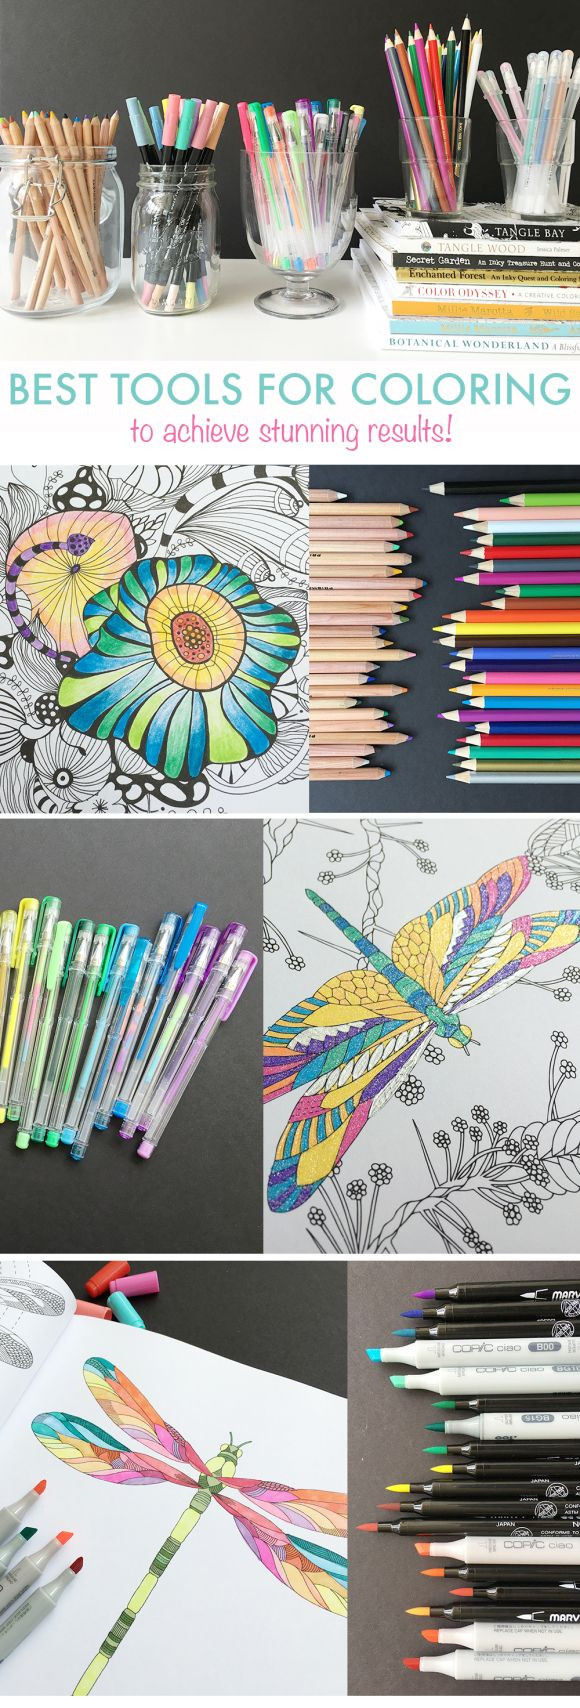 Ac Moore Adult Coloring Books
 Learn the best tools tips and tricks for coloring